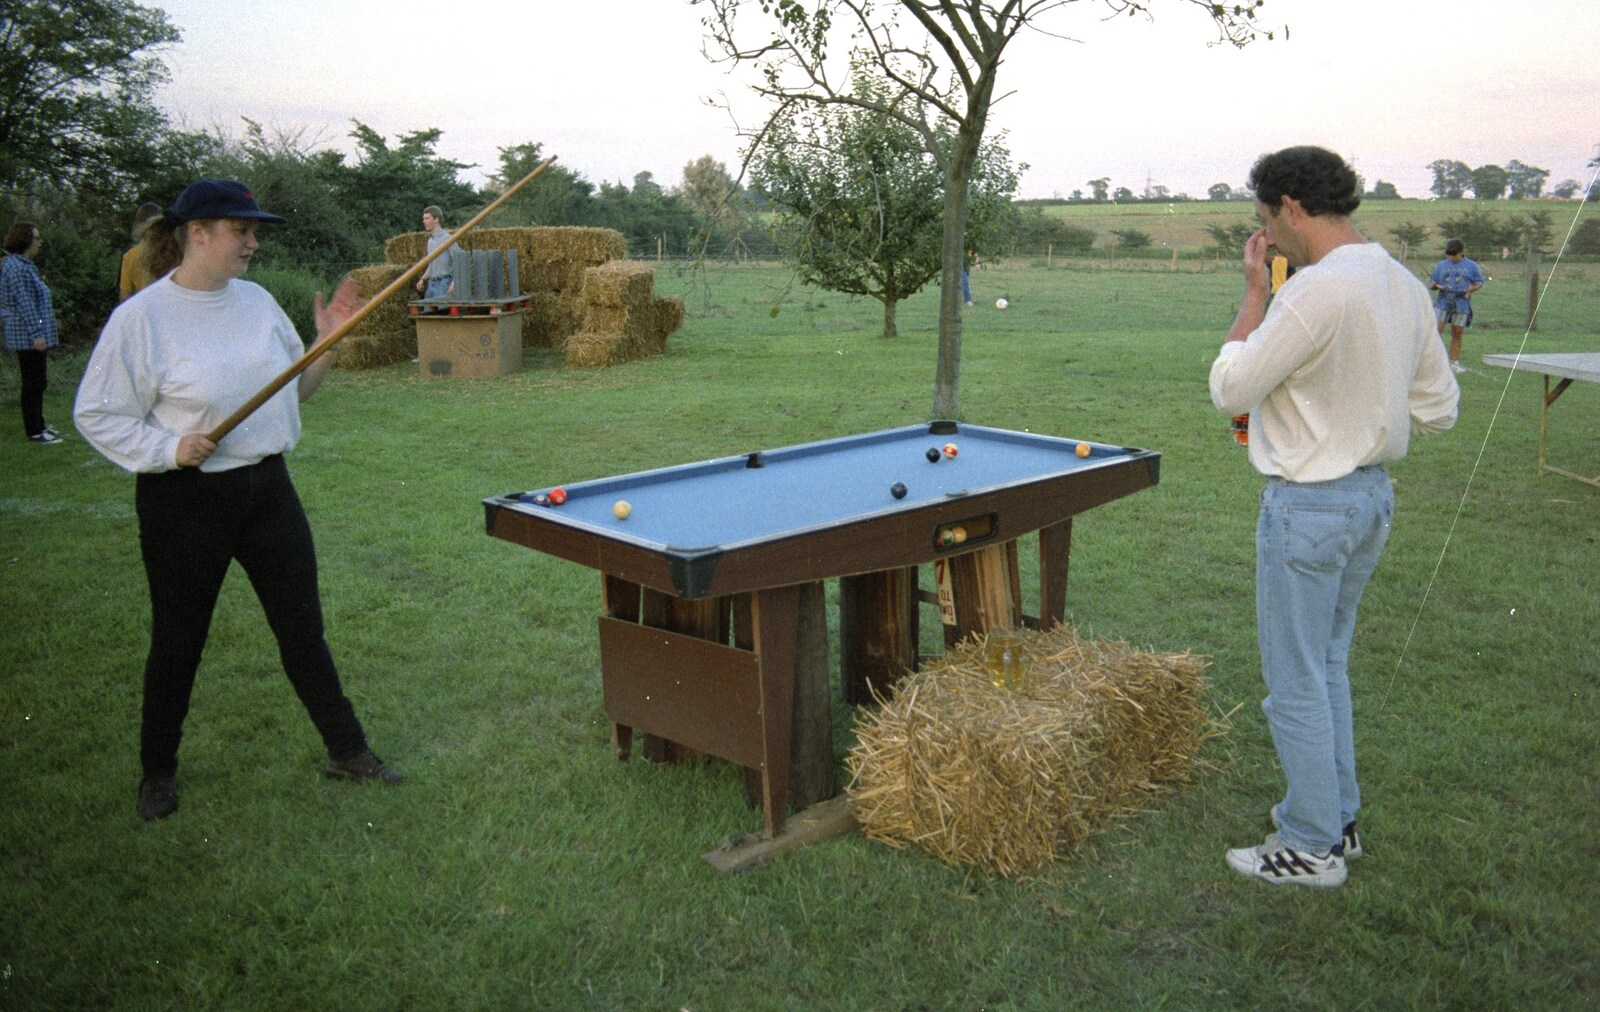 A surreal game of pool in a field from Bromestock 1 and a Mortlock Barbeque, Brome and Thrandeston, Suffolk - 24th June 1997